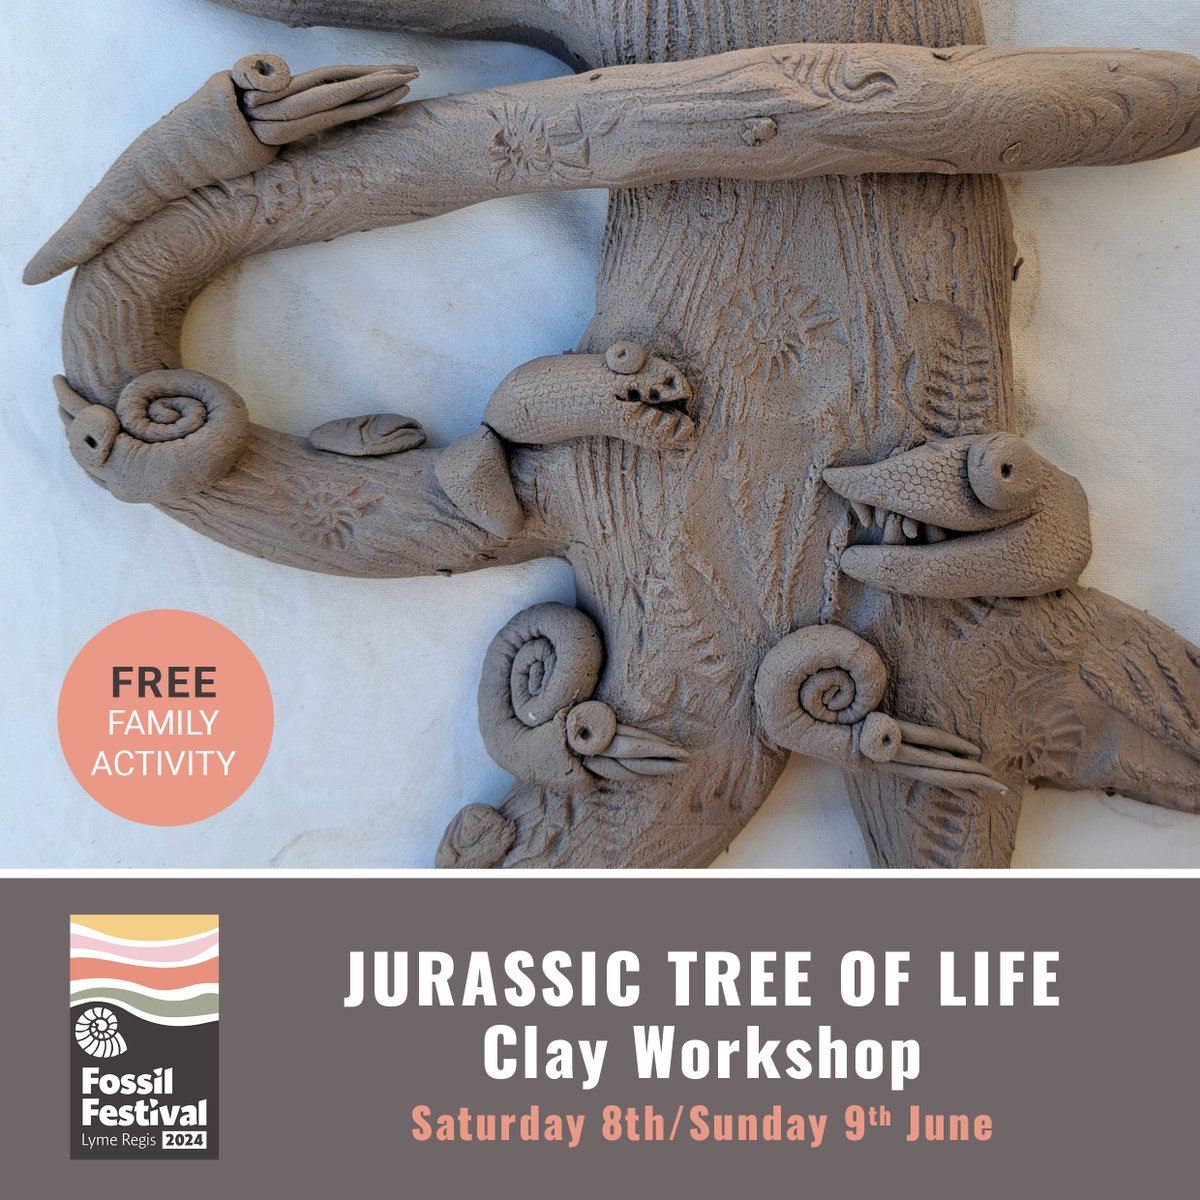 Fossil Festival 🎨CRAFT at the Jubilee Pavilion
'Jurassic Tree of Life' Clay Workshop – 8th June/9th June, 10am-4.30pm. Join in this community installation of the ‘Jurassic Tree of Life’ modelled in air drying clay and based on the Mexican tree of life! FREE, drop-in activity.